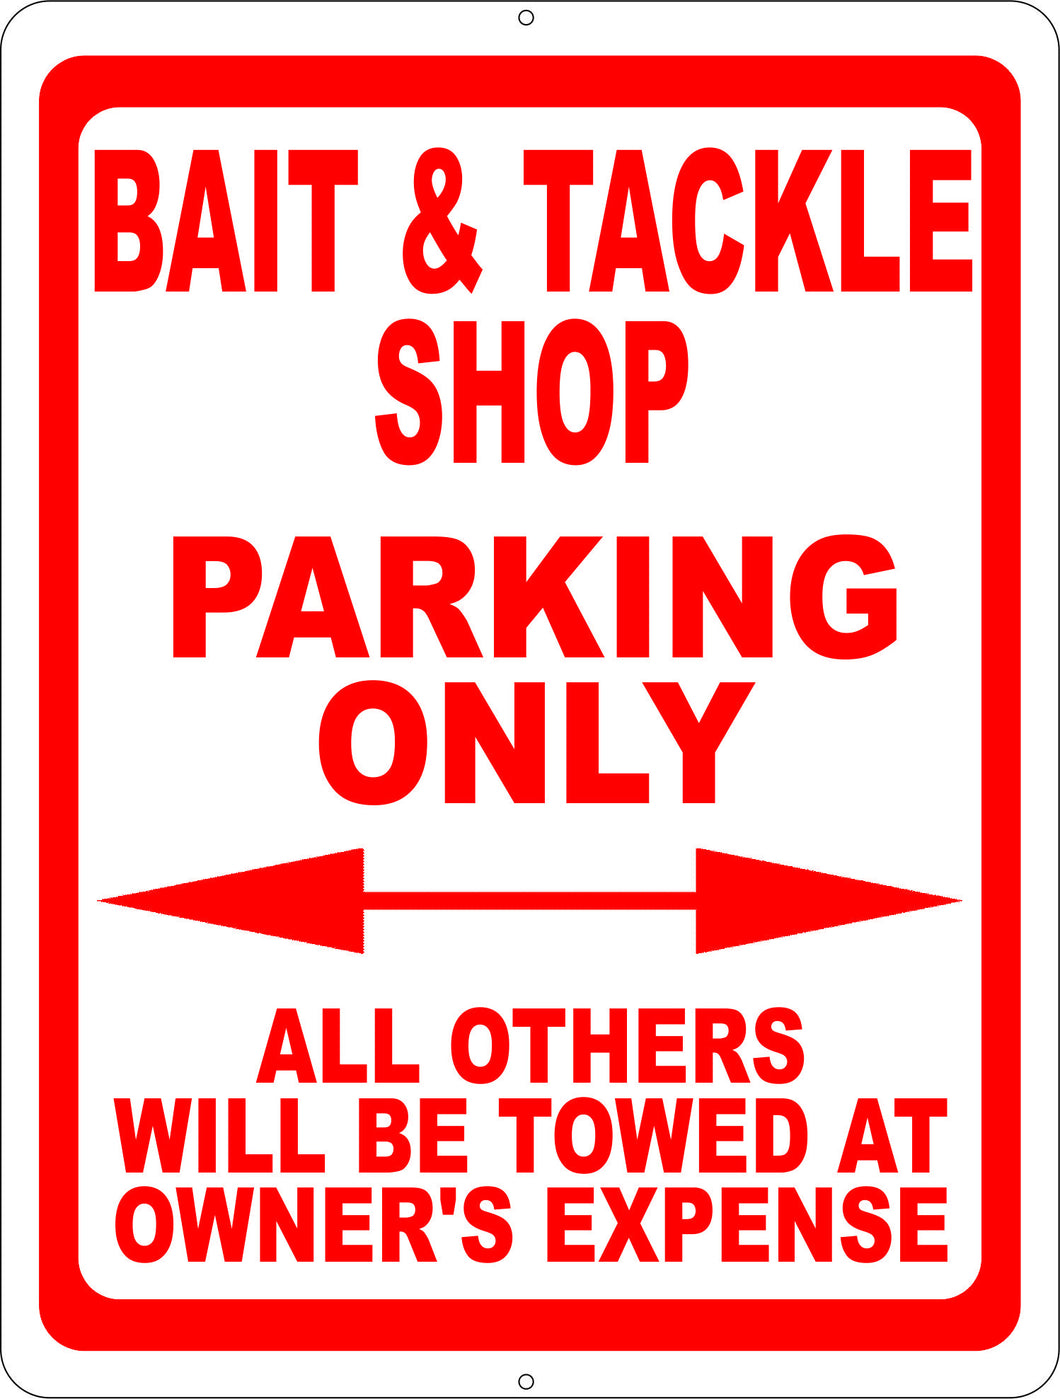 Bait & Tackle Parking Only All Others Towed at Owners Expense Sign - Signs & Decals by SalaGraphics